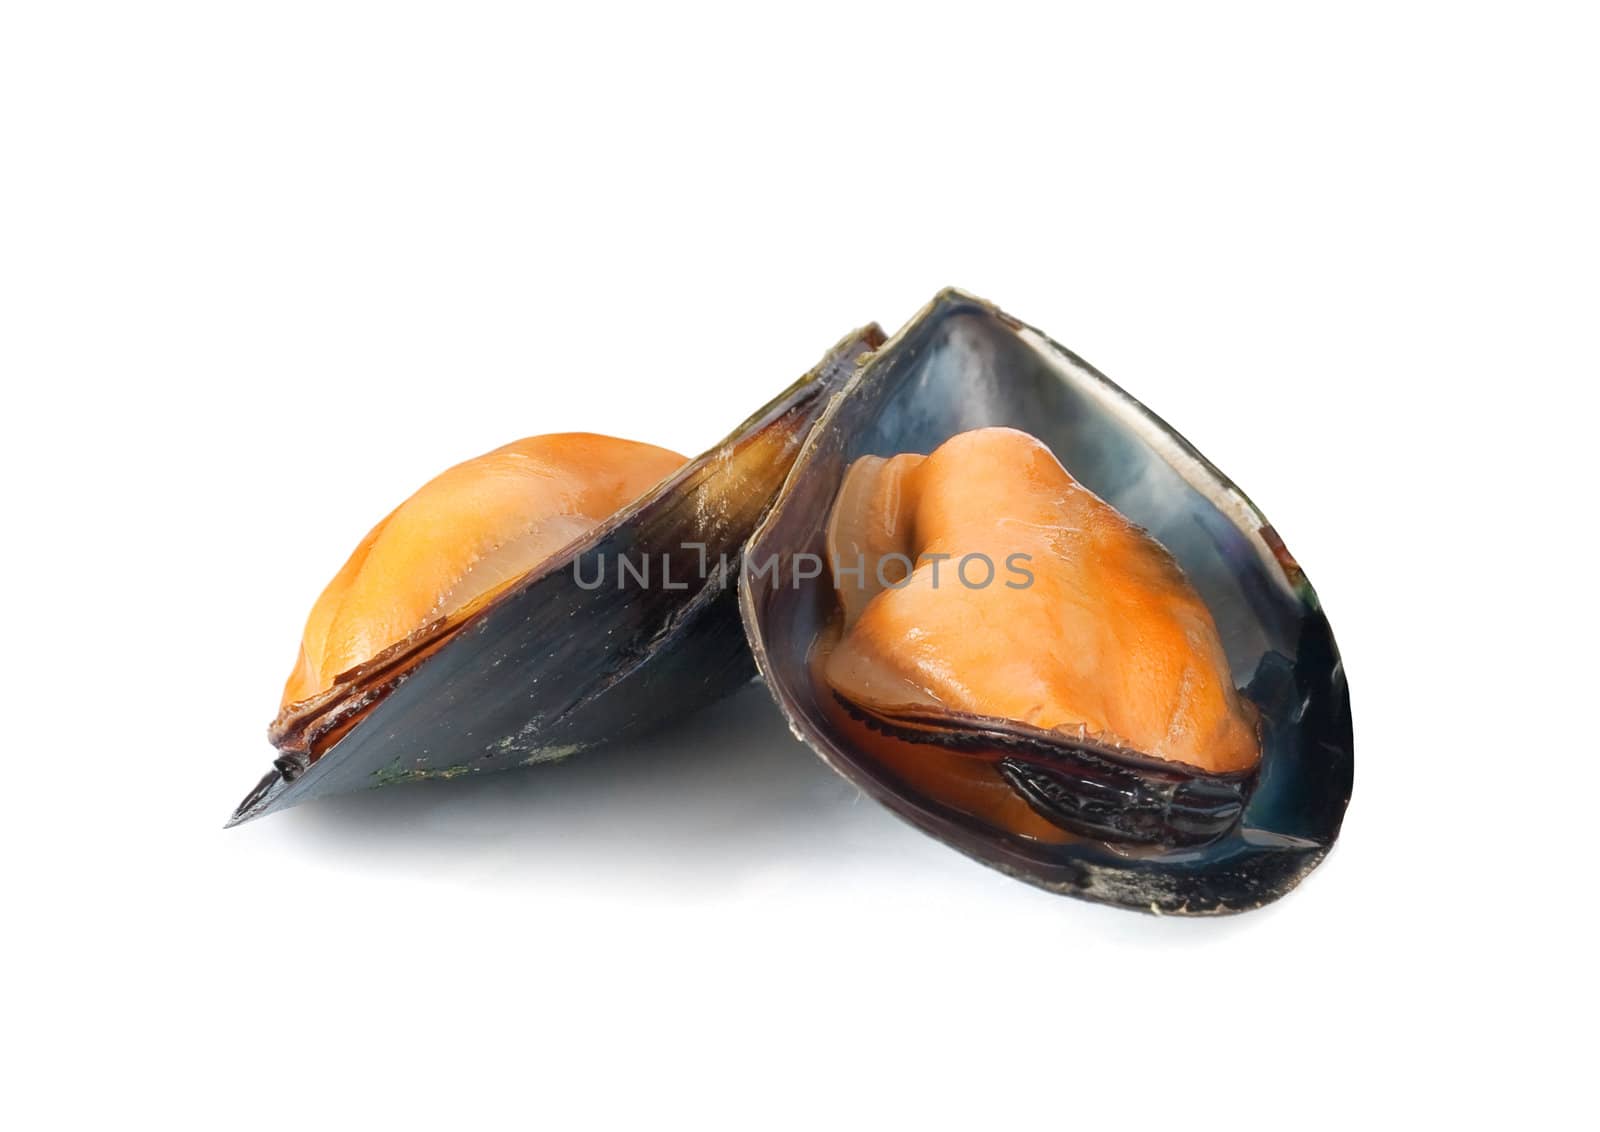 Some mussels just cooked isolated on white background